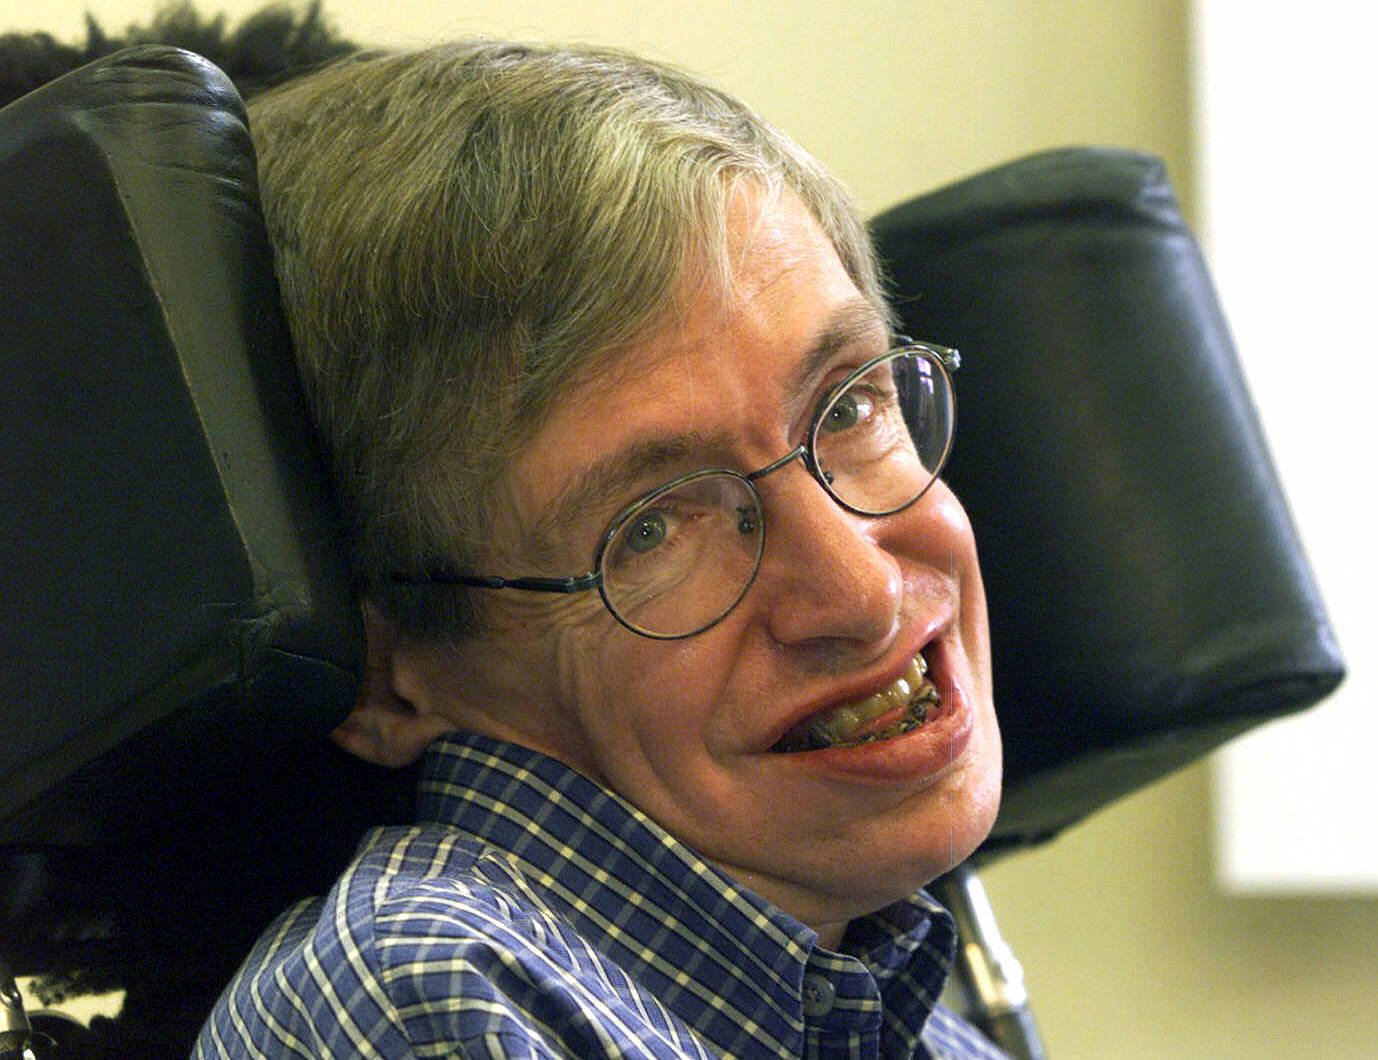 Ashes of Stephen Hawking to be placed in Westminster Abbey